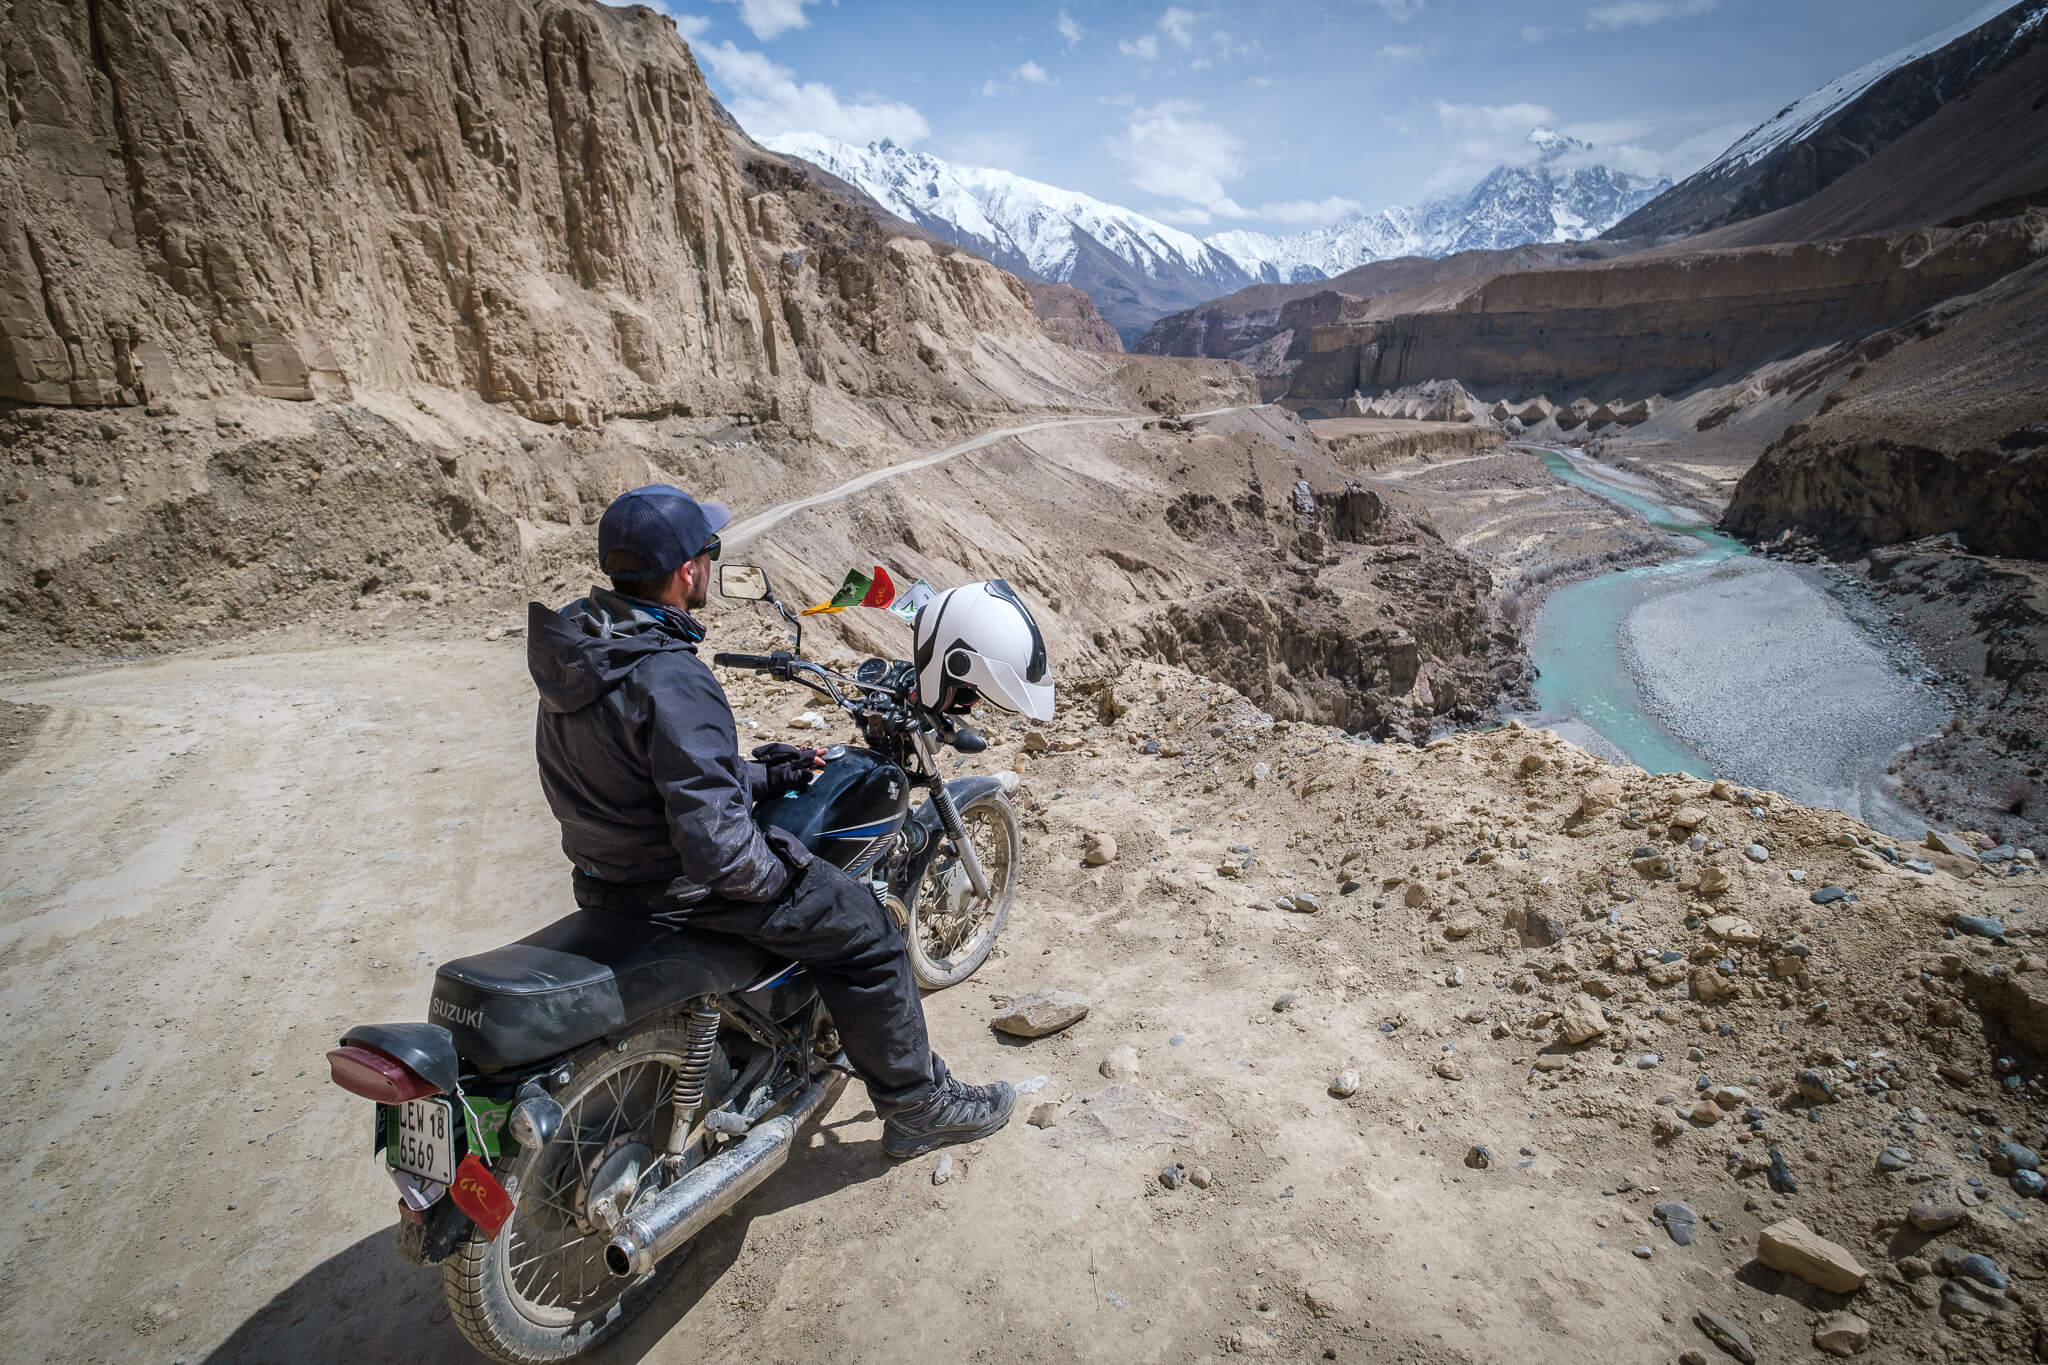 Will Hatton enjoys an epic view in Pakistan from his motorbike